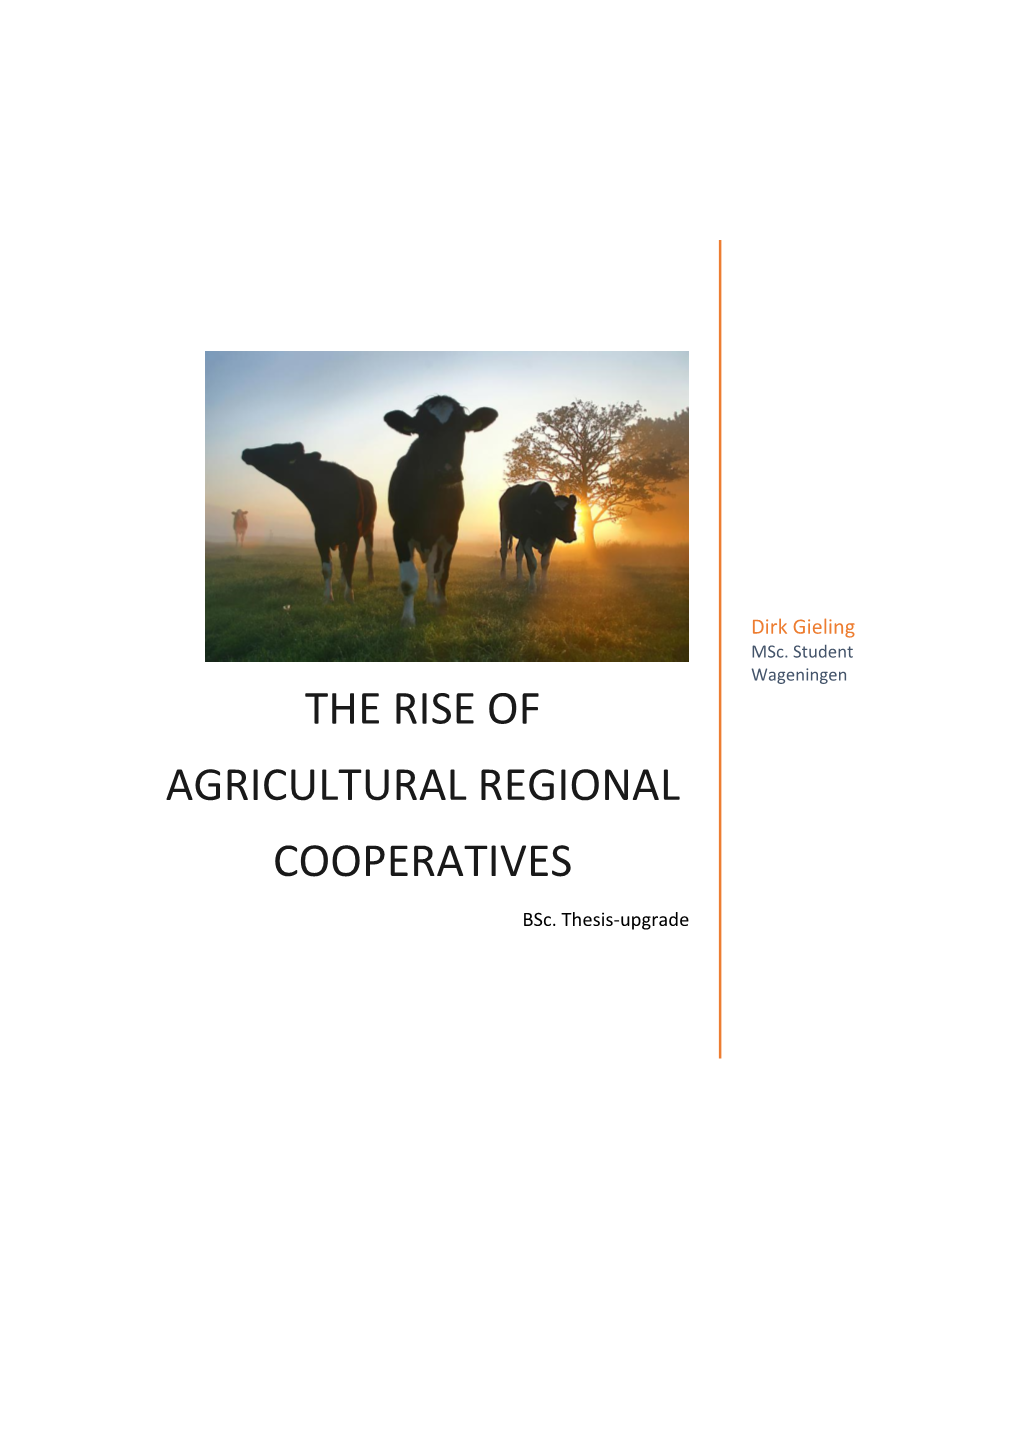 The Rise of Agricultural Regional Cooperatives